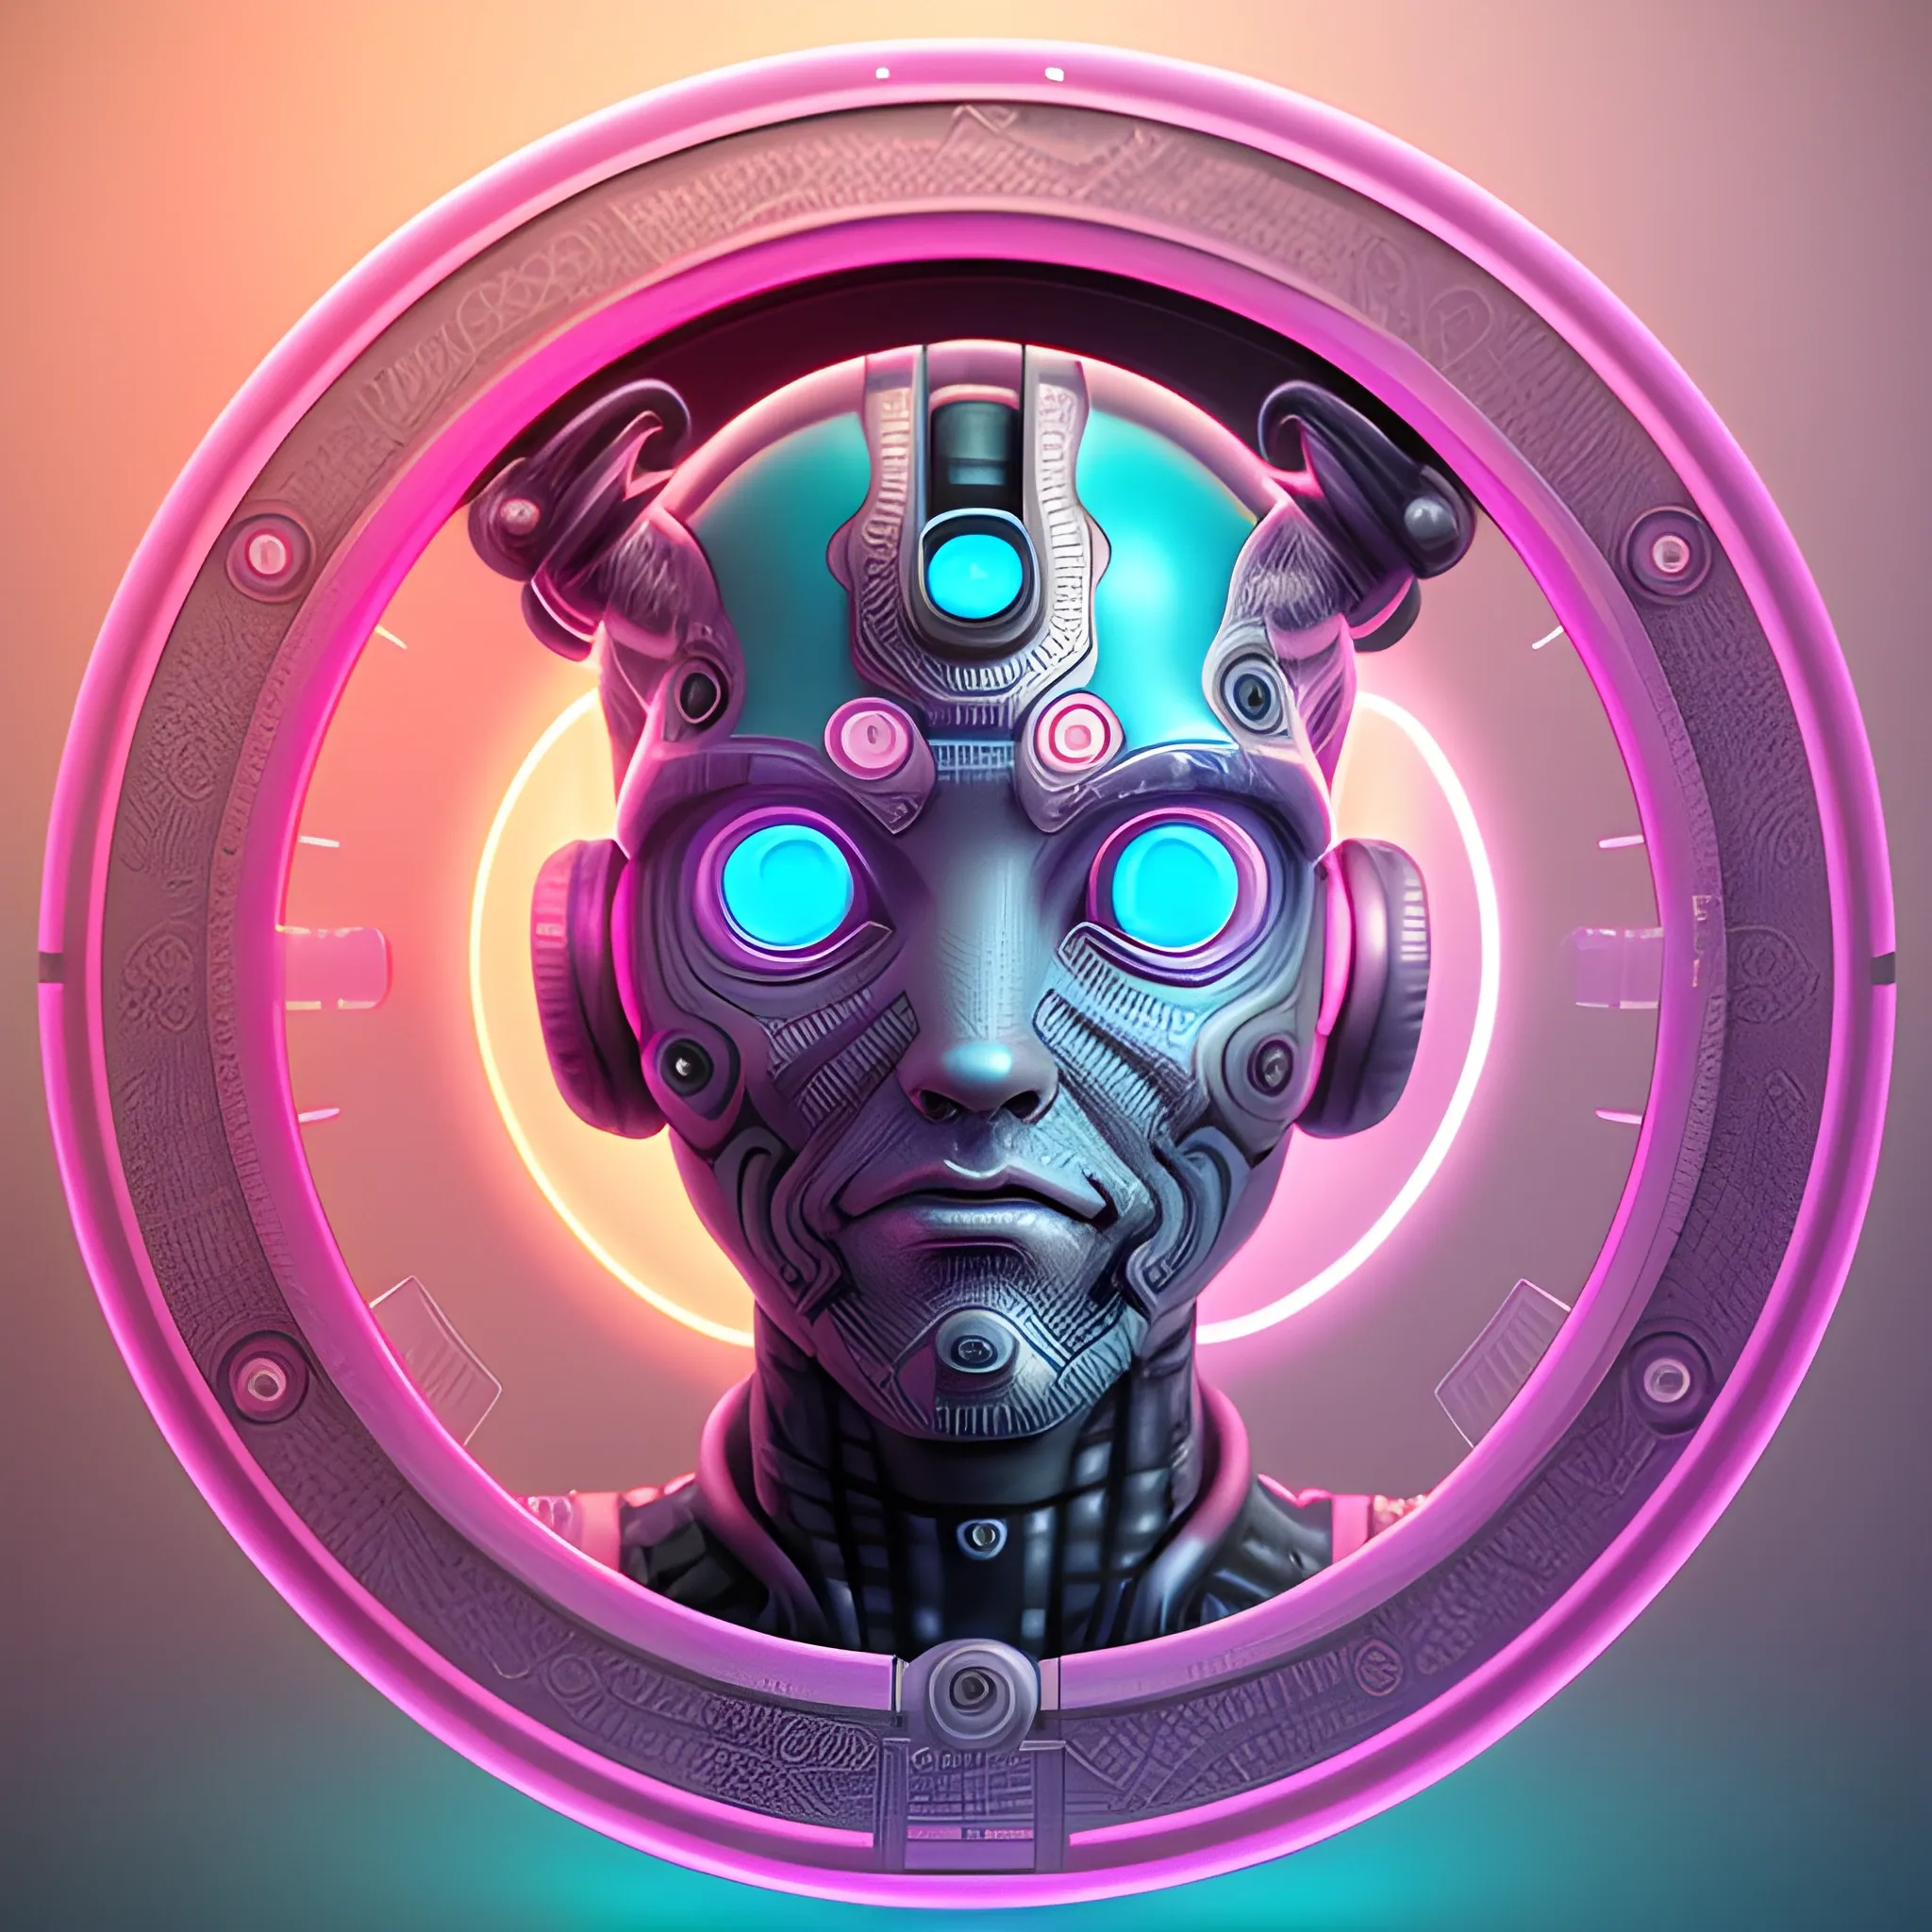  high-definition, realistic, intricate wavelength detailing, embossed circular frame, 3D, Sci-Fi, Hip-hop, Urban, pink and cyan colored, circular male cybernetic avatar, glowing eyes